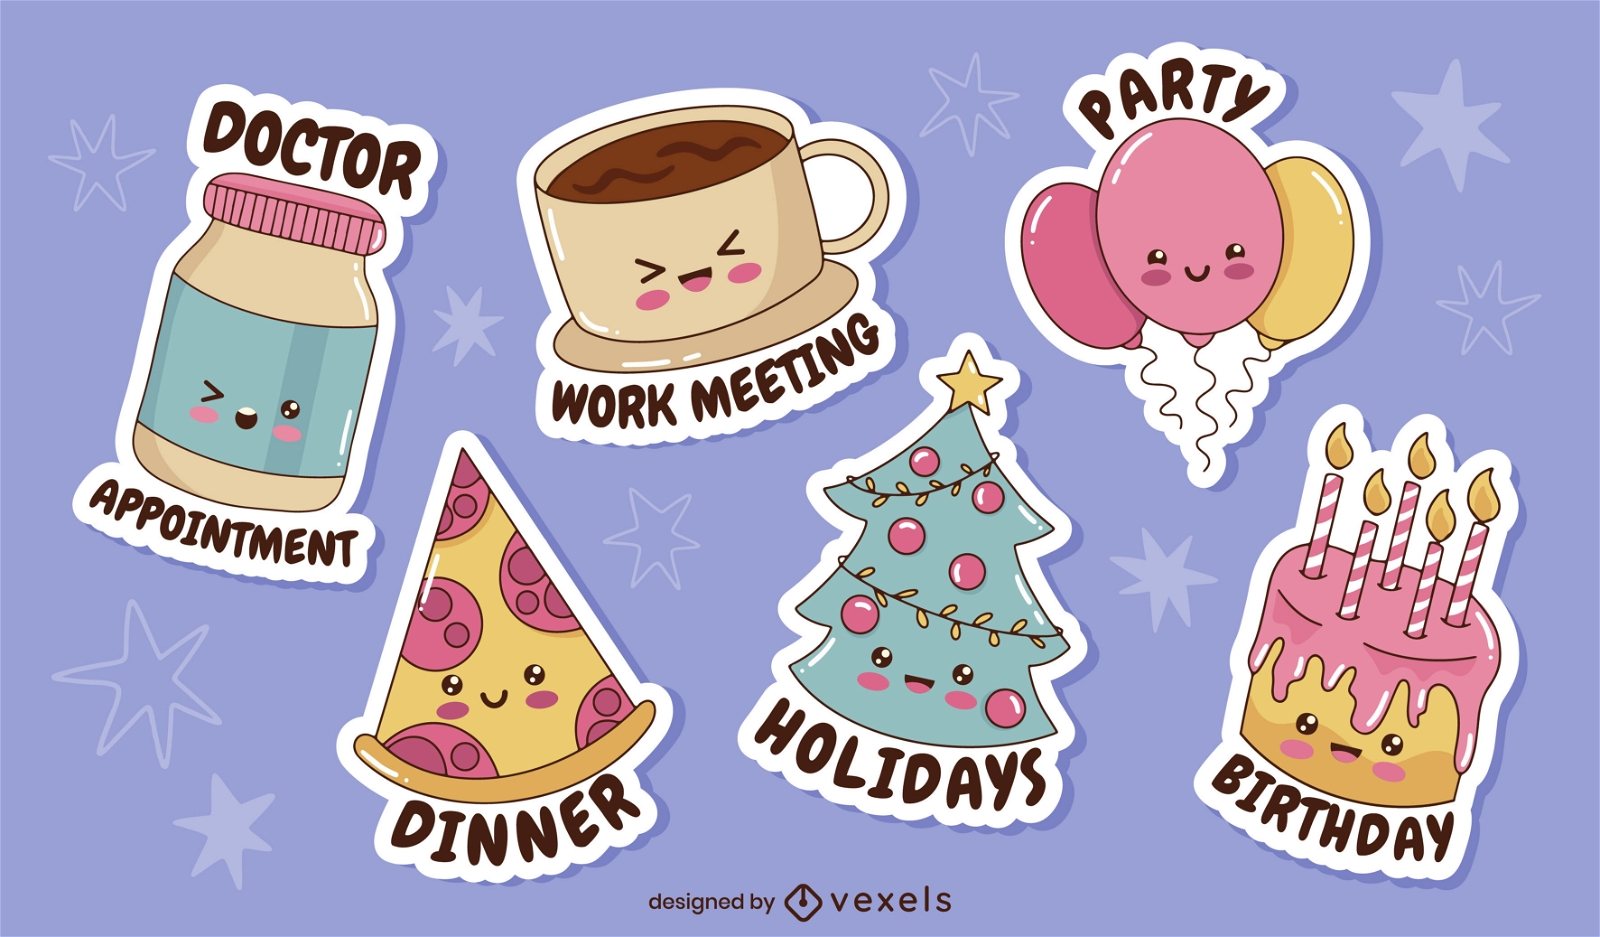 Kawaii objects and quotes sticker set